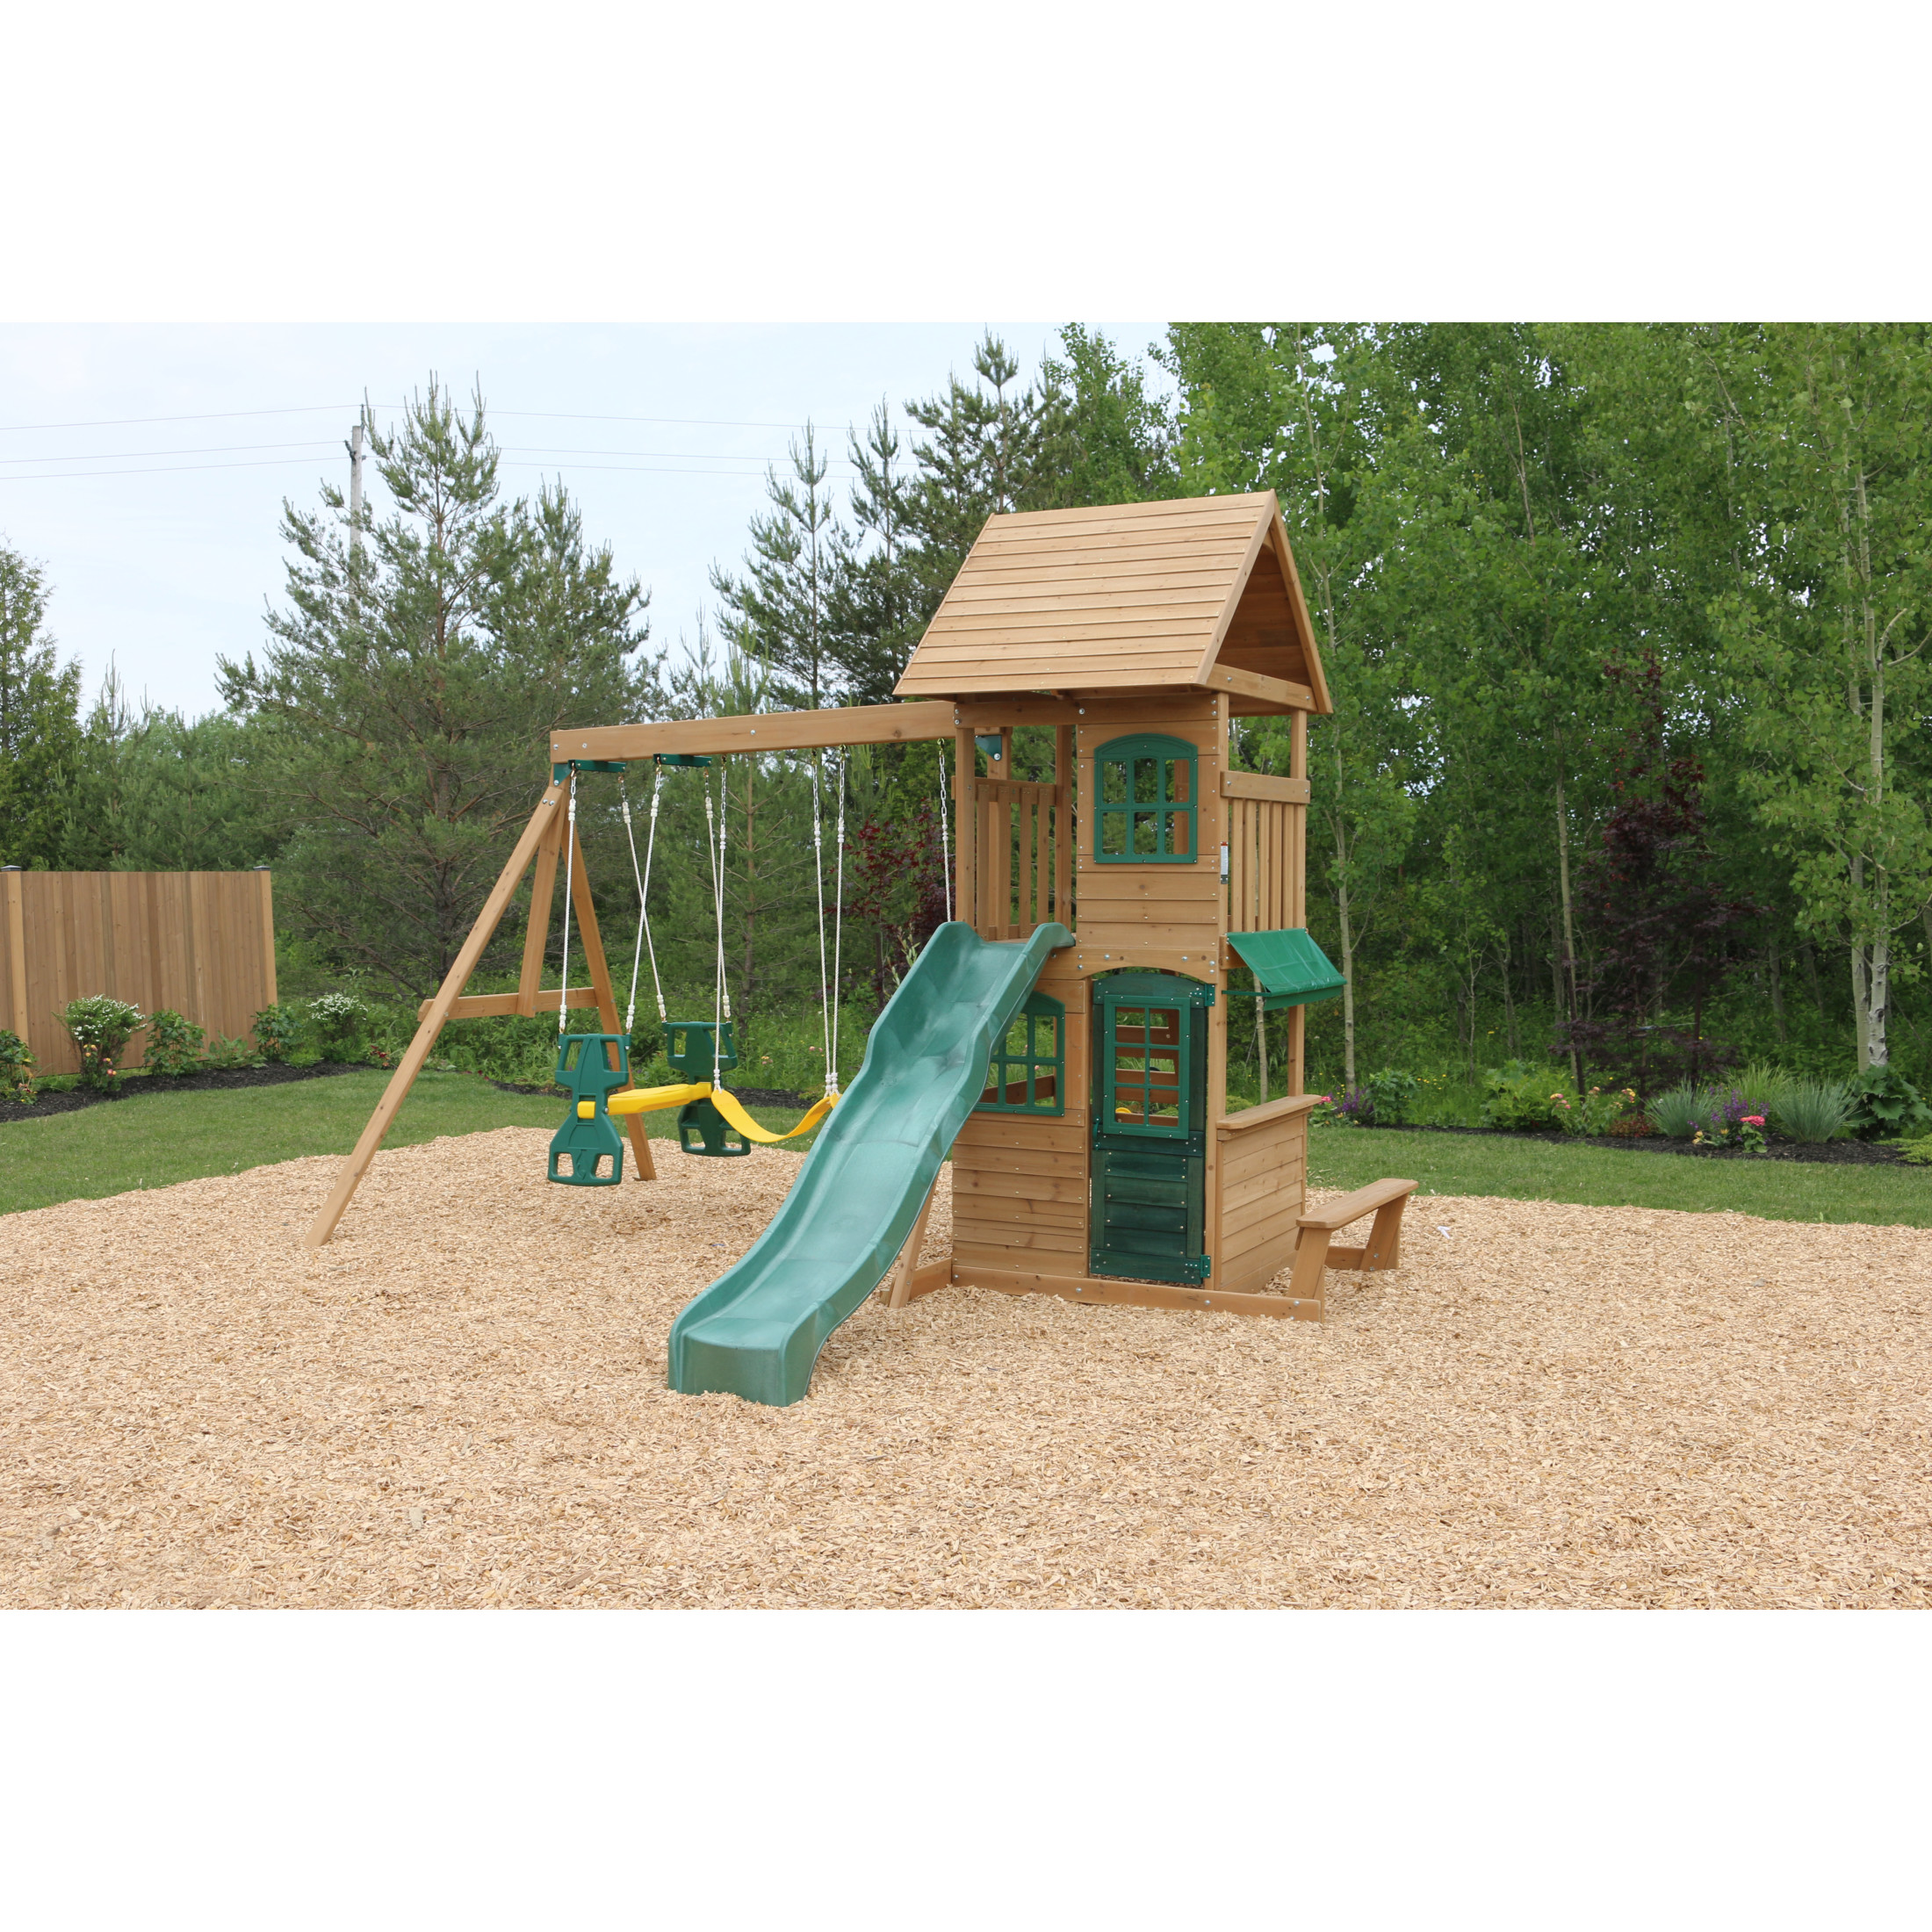 KidKraft Windale Wooden Swing Set / Playset with Clubhouse, Swings, Slide, Shaded Table and Bench - image 3 of 12